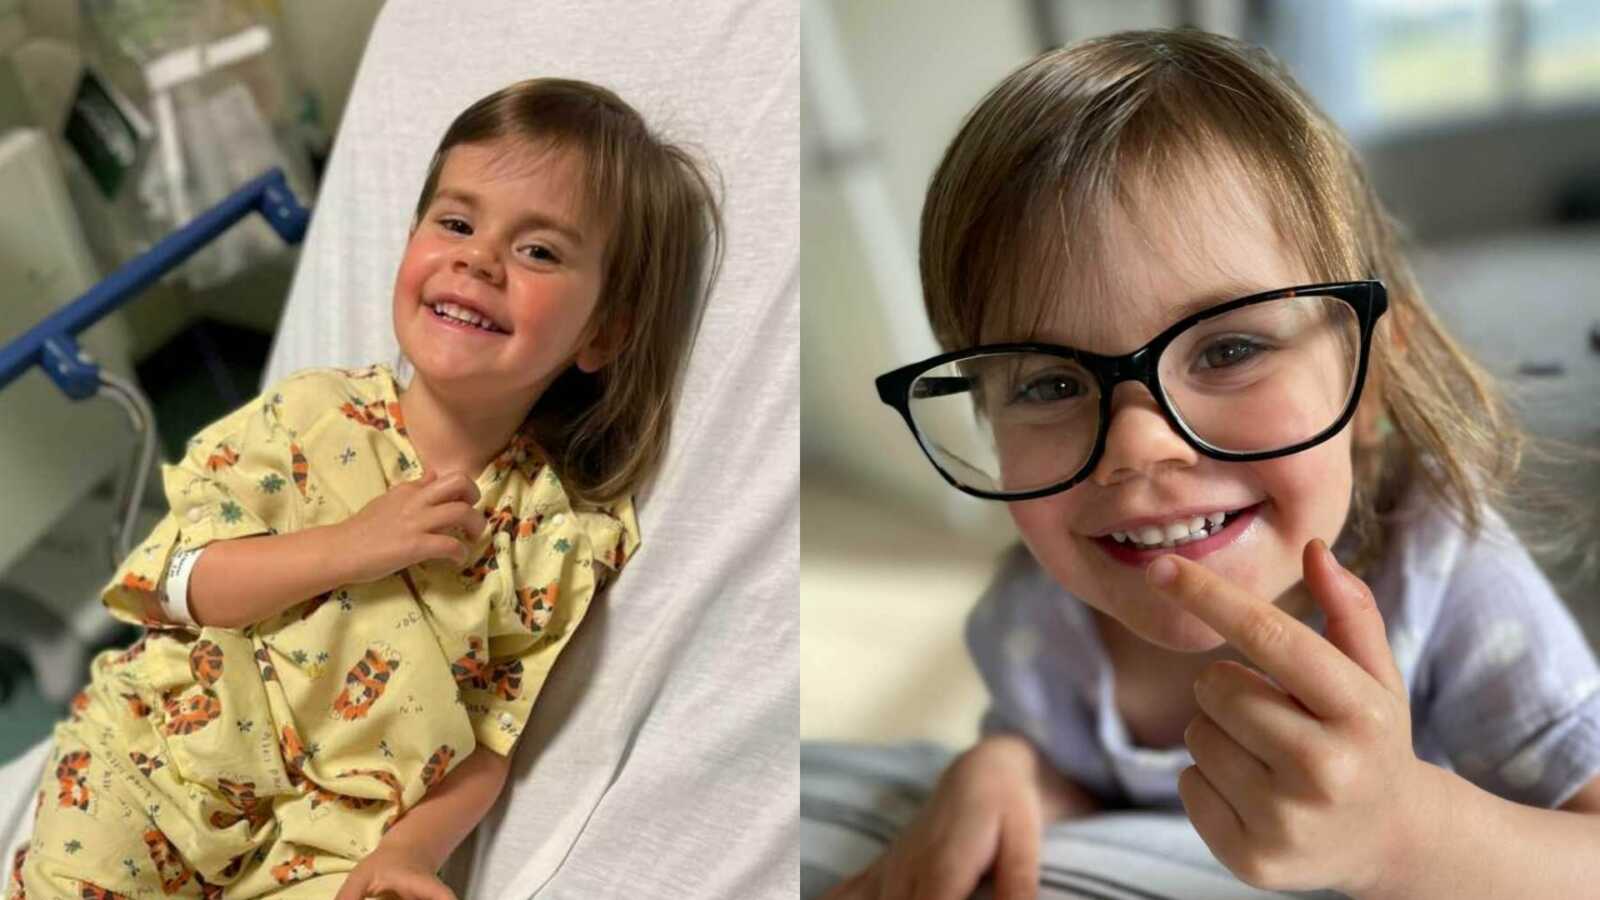 A little girl in a hospital bed and a cancer survivor wearing glasses